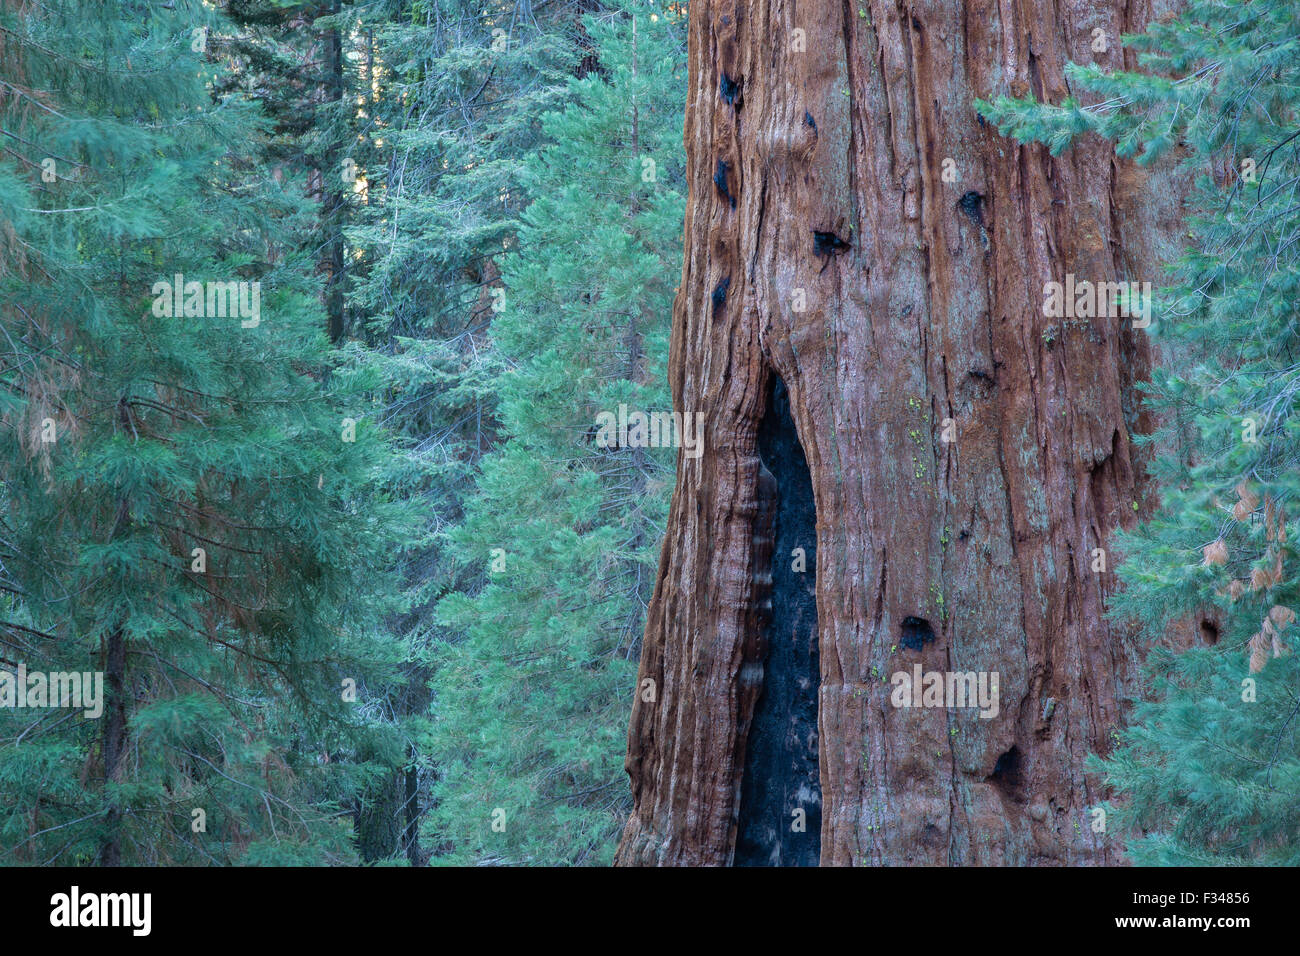 the Sherman Tree, the largest tree in the world, in Sequoia National Park, California, USA Stock Photo